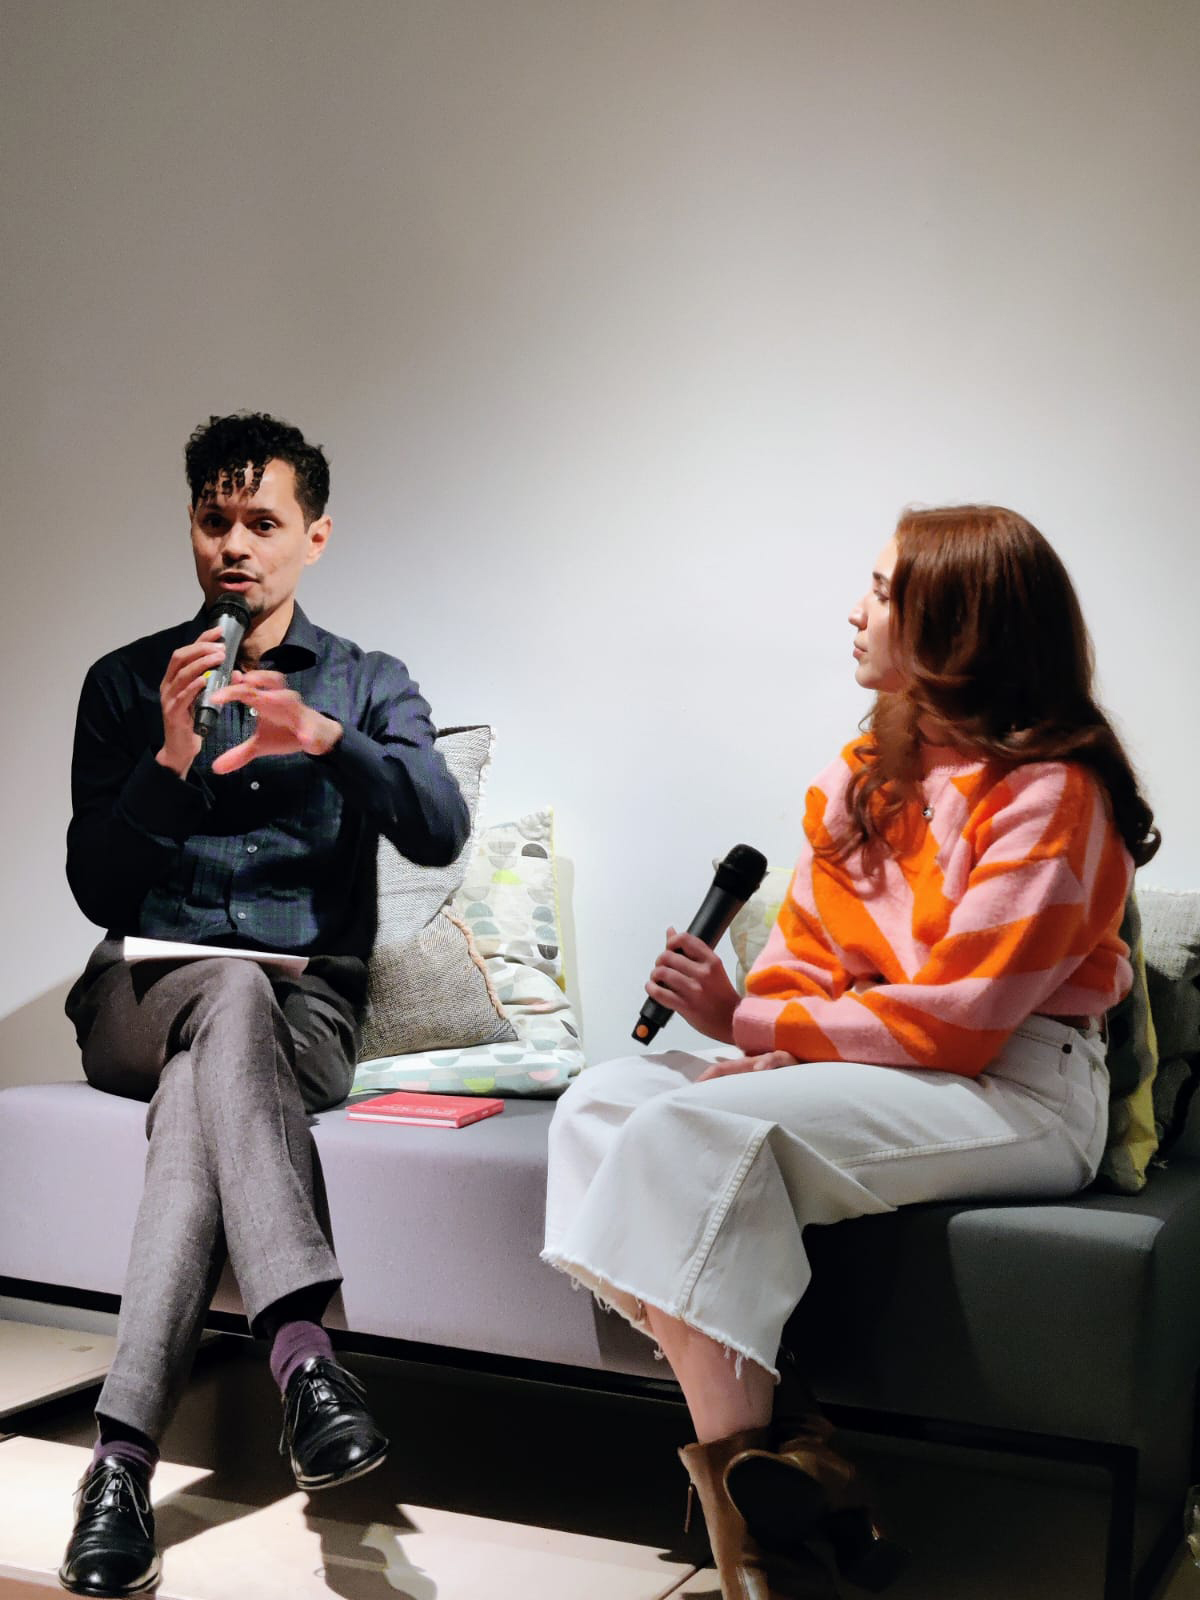 A woman wearing an orange and pink top speaking to a man sitting on a couch